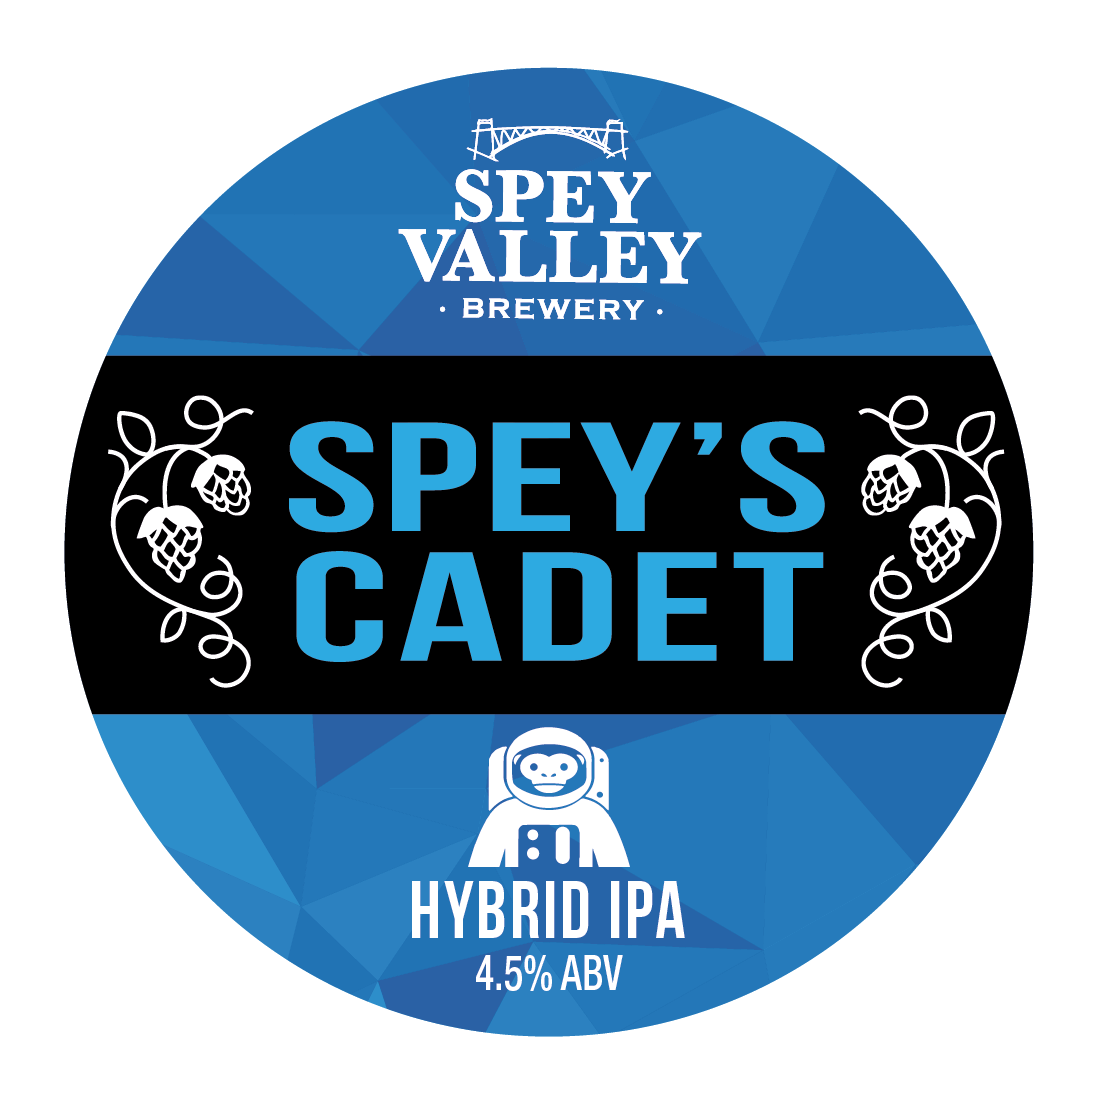 Spey Valley Spey’s Cadet 9 Gallons Pale 4.5%